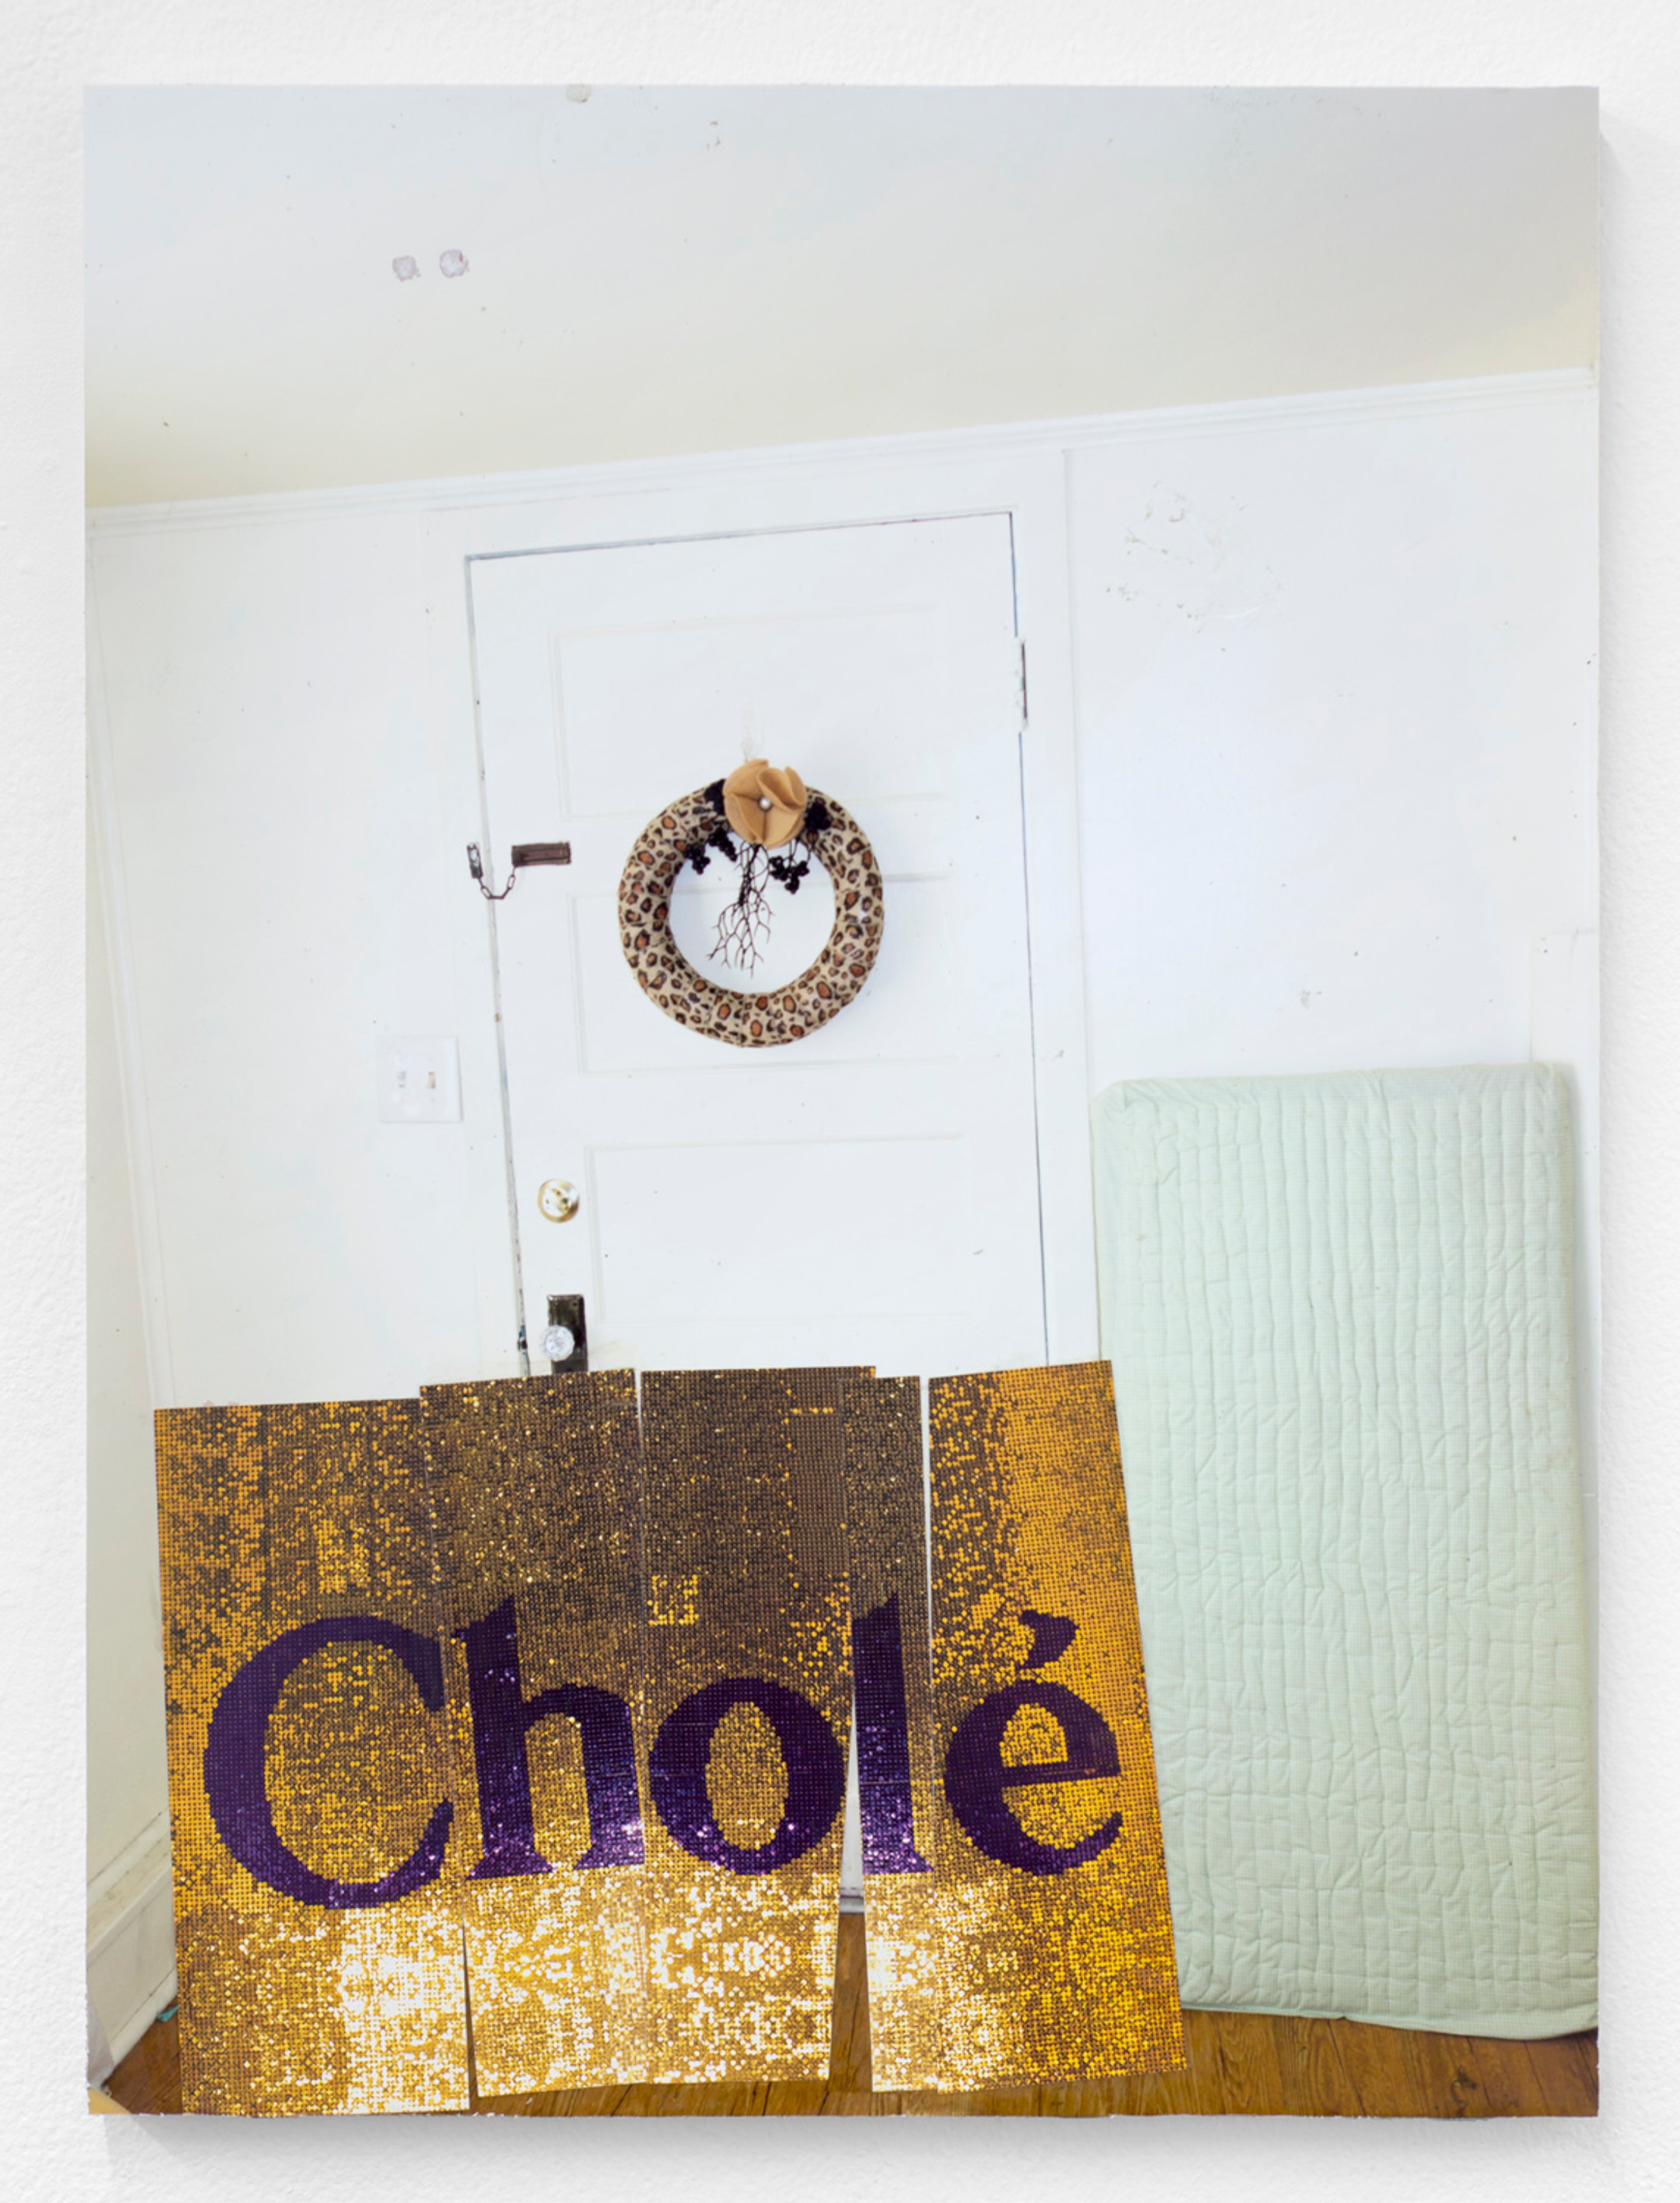 Chole Home (2017). Wood panel, paper, poster print. 24h x 18w inches (61h x 46w cm)